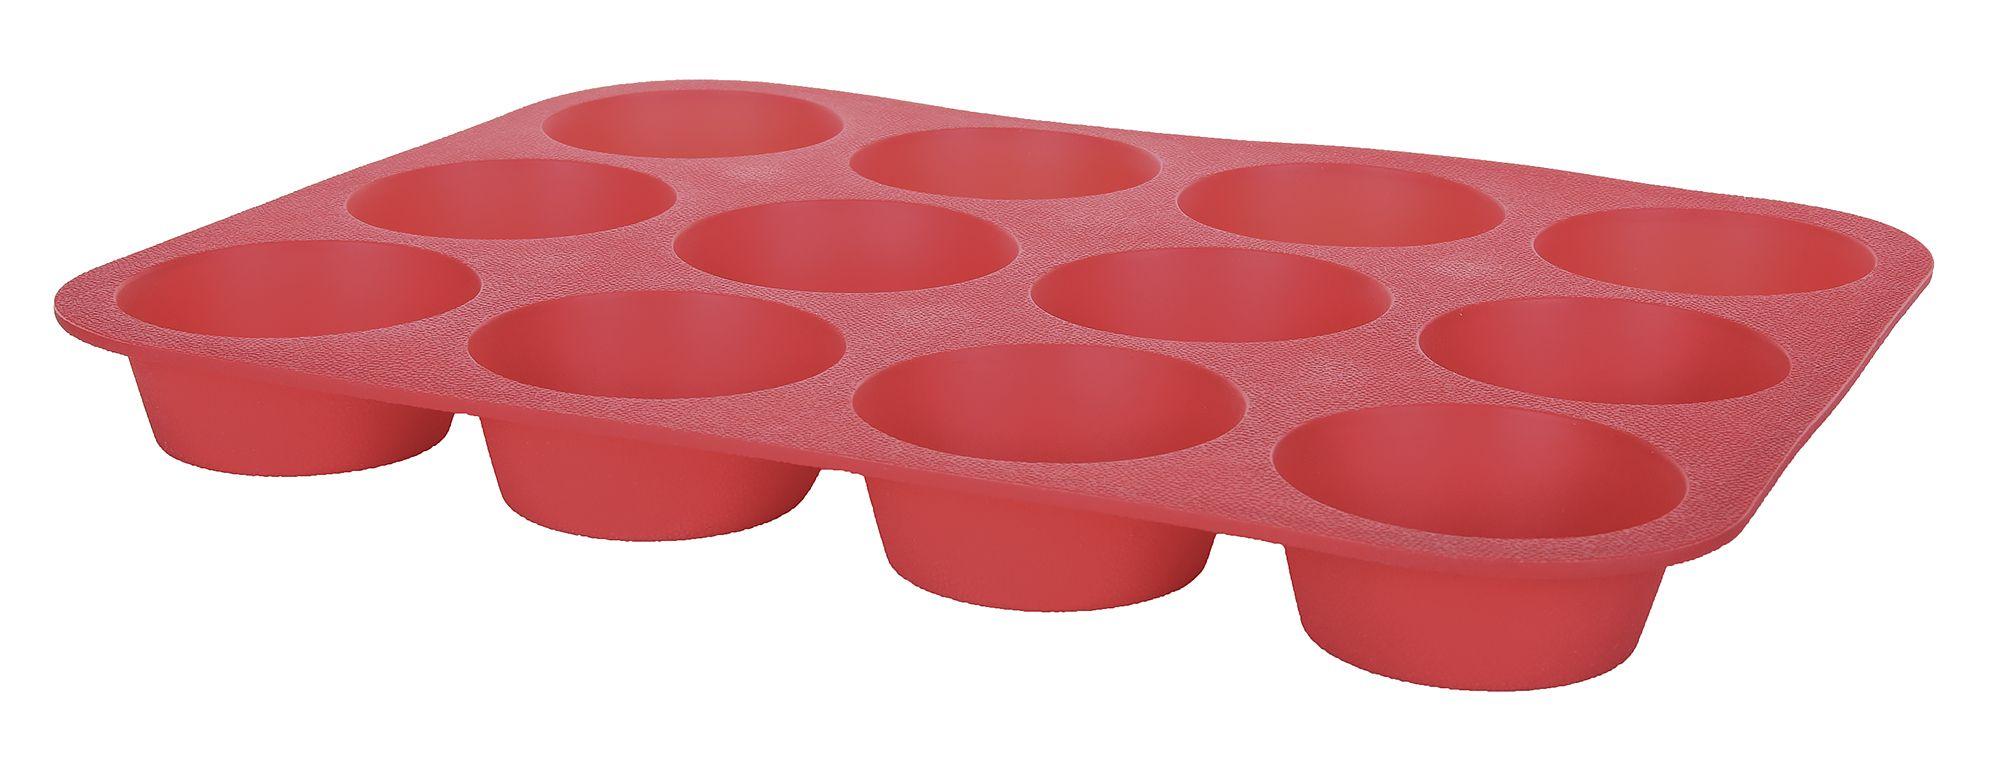 Silicone muffin tins 12 pcs. DR.OETKER, red